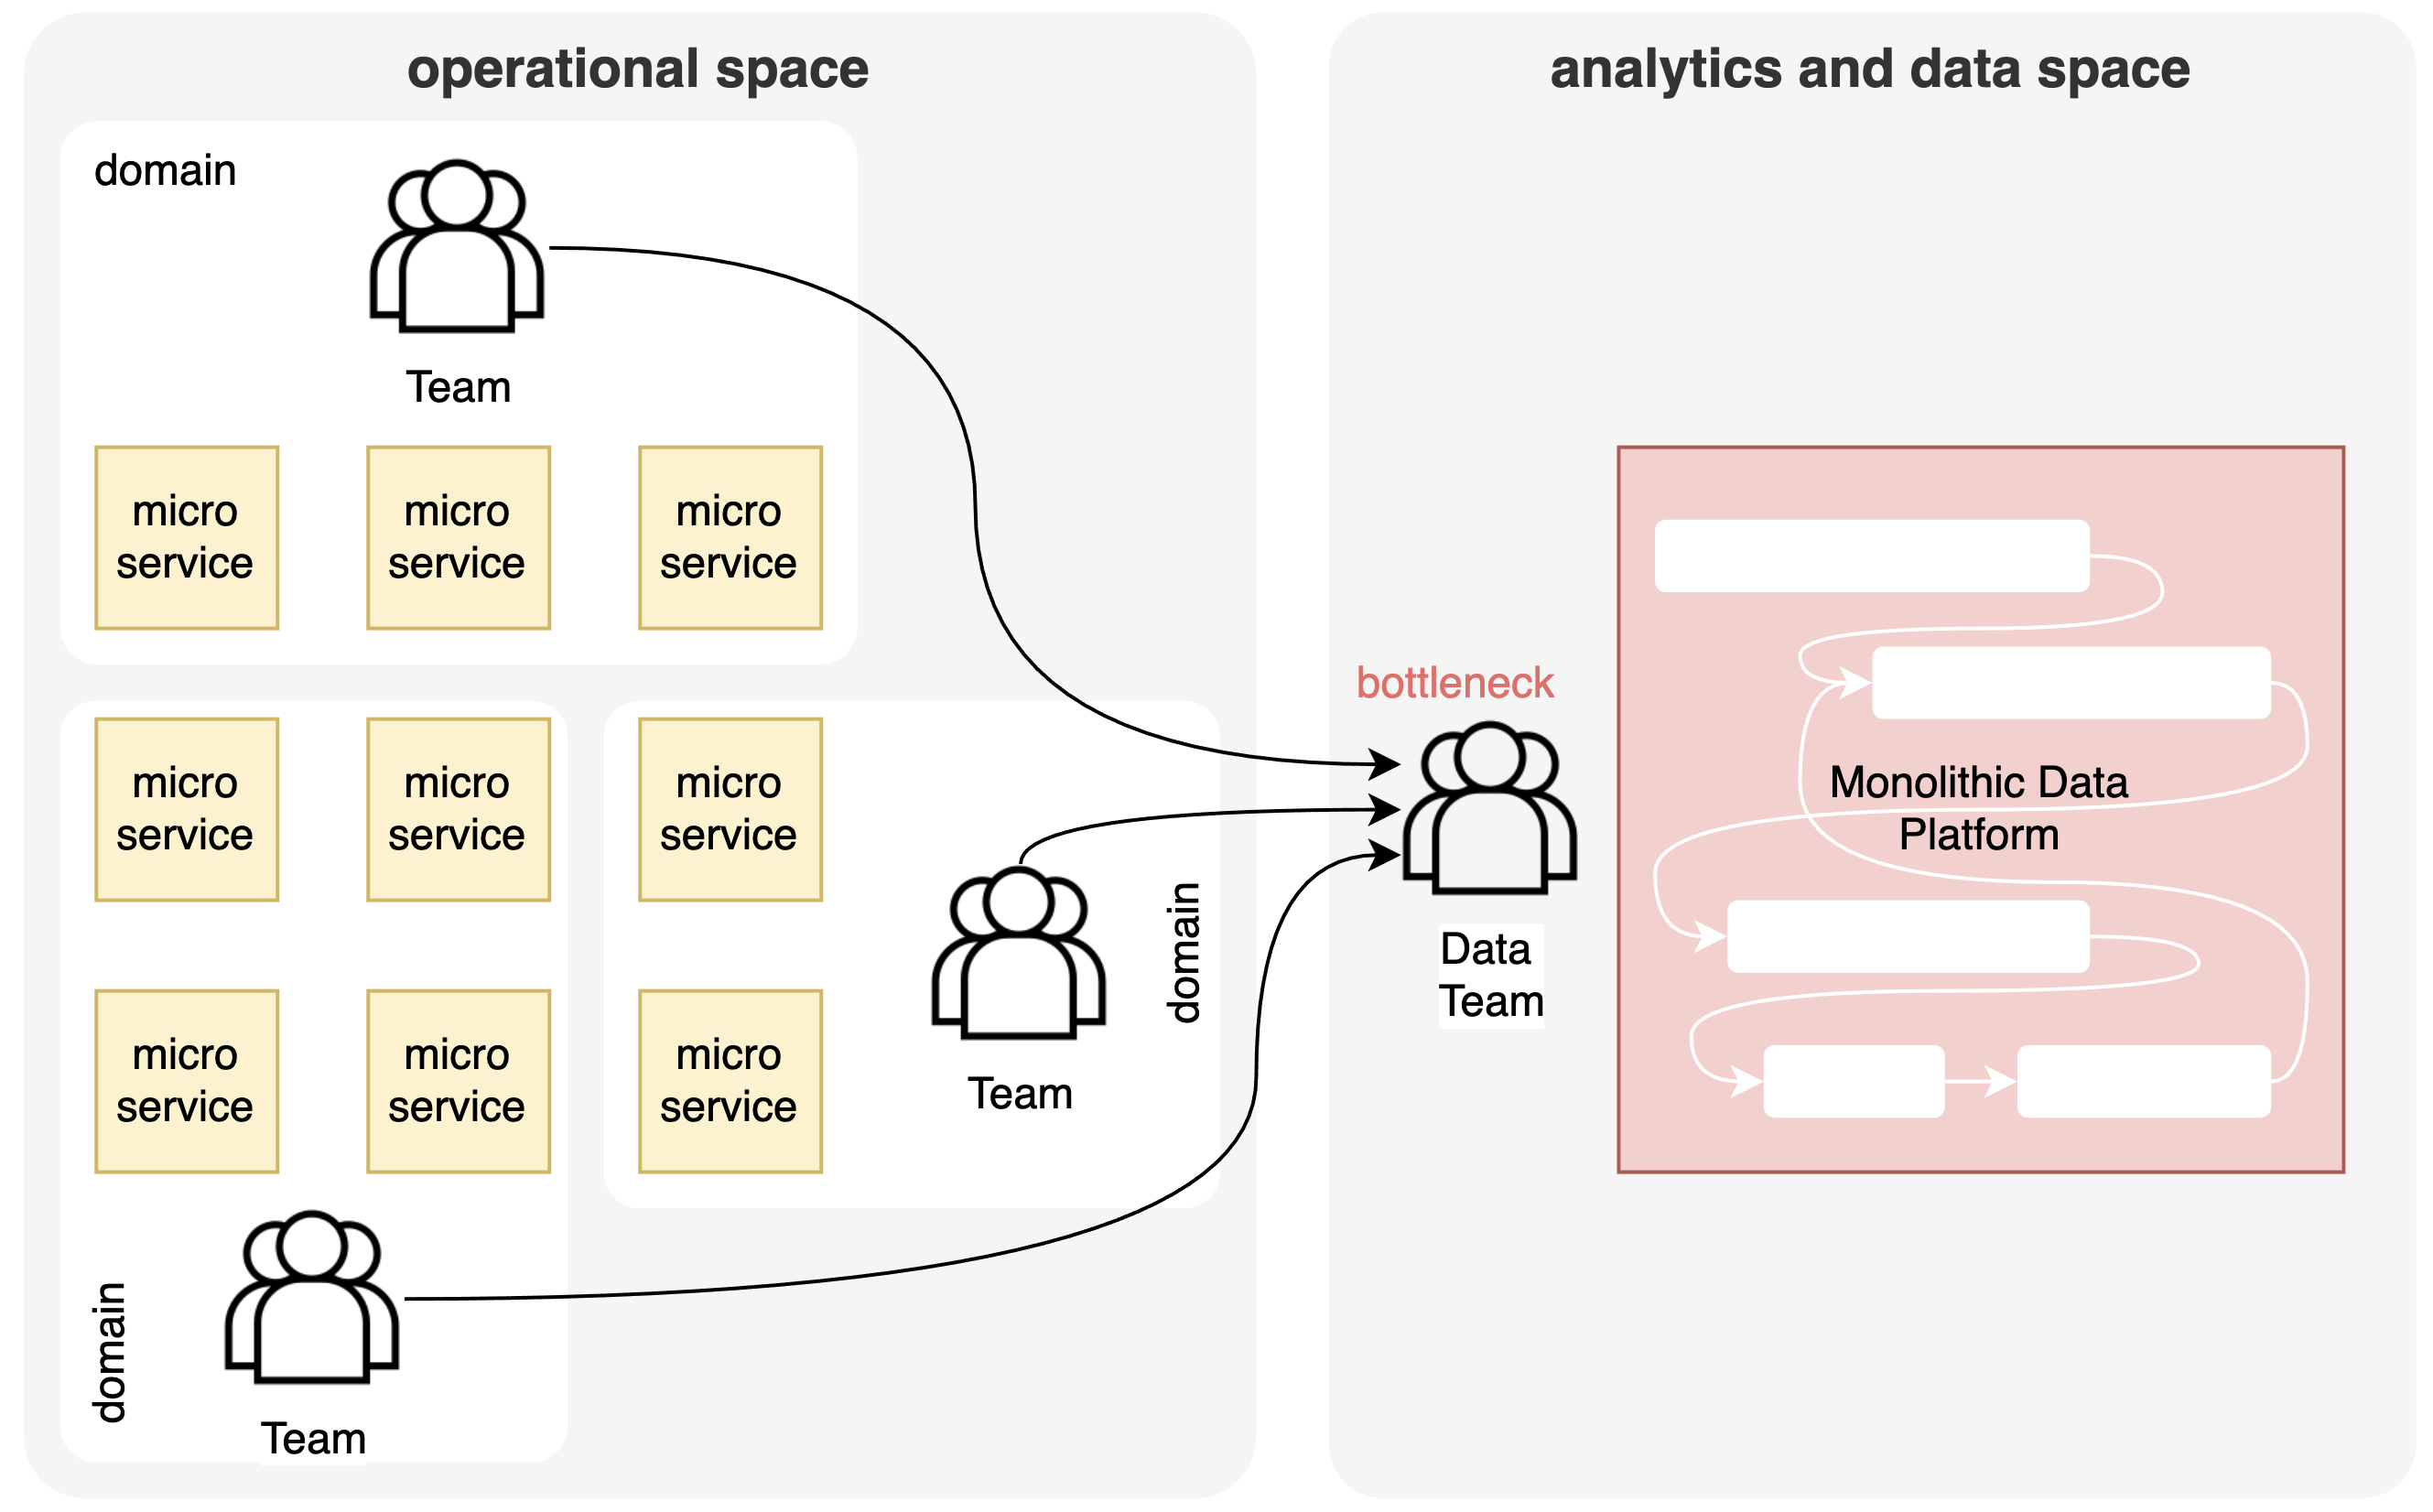 Schema illustrating that the analytics and data space is monolithic but is moving towards a micro-services architecture